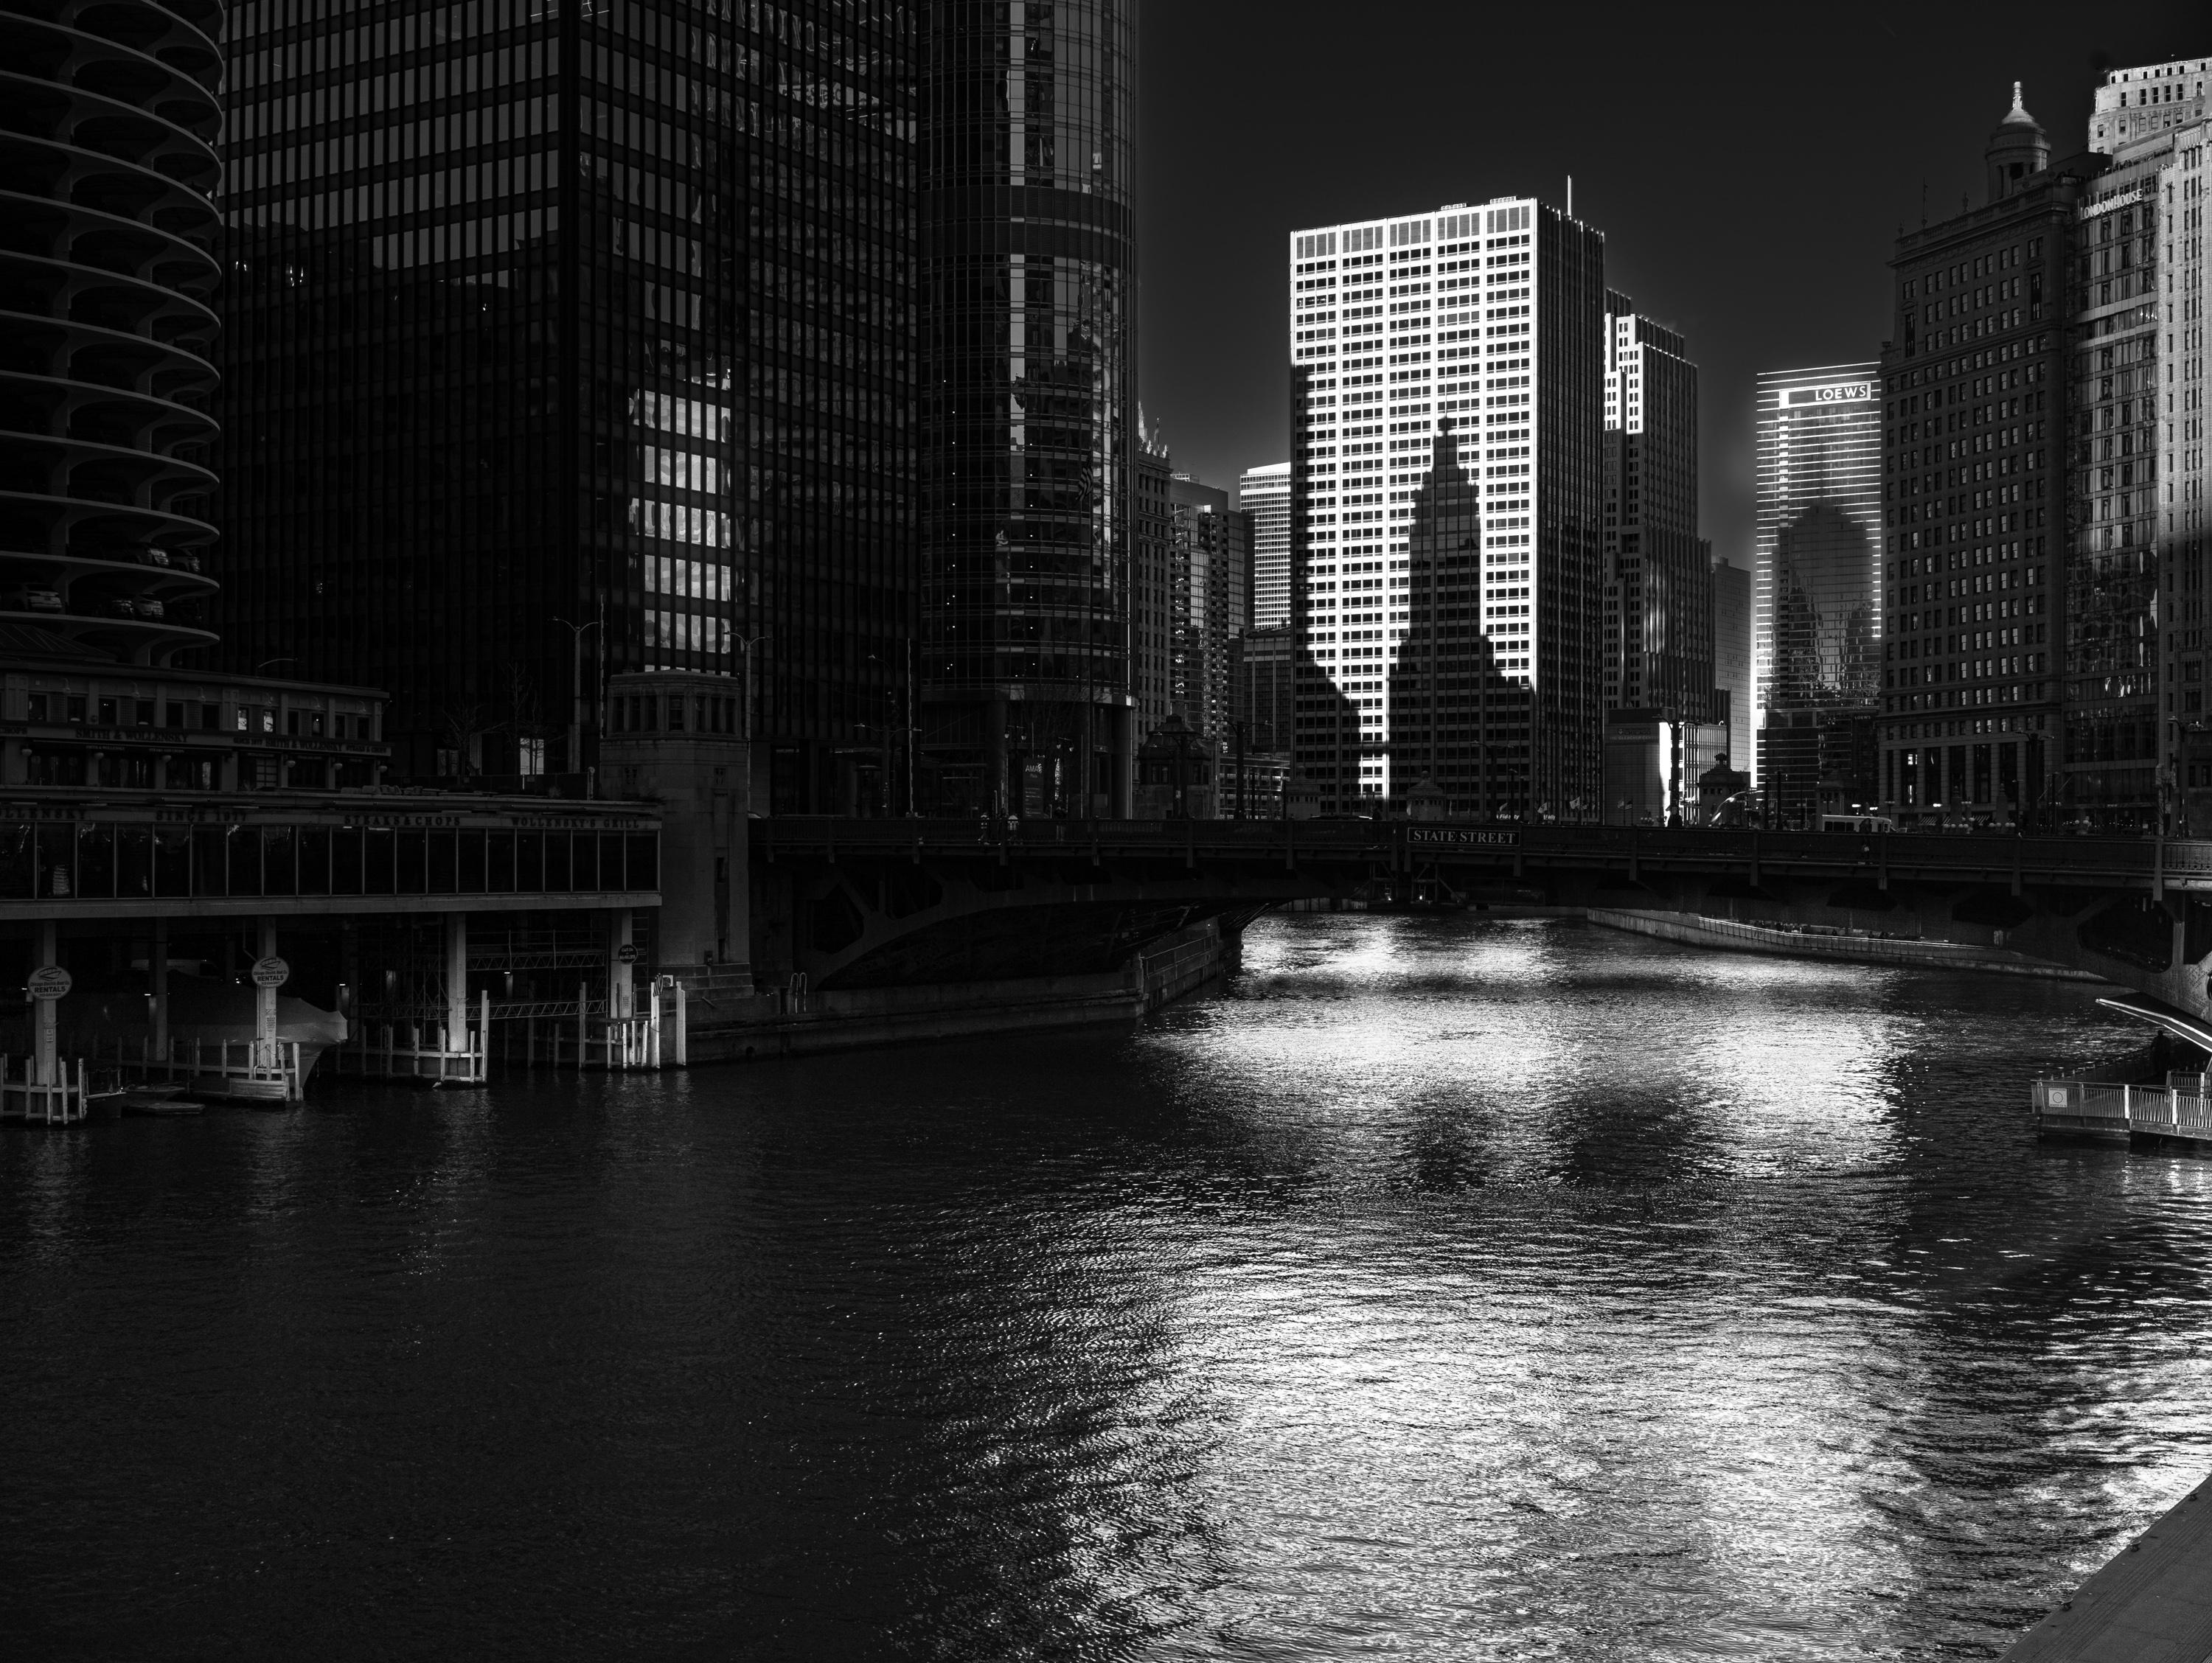   Limited Edition Black and White Photograph - " Shadow Buildings" 17 x 22. Taken on a photographic road trip with a stop to photograph Chicago architecture.

About Howard Lewis:
Lewis’ artistic practice often explores science, engineering,